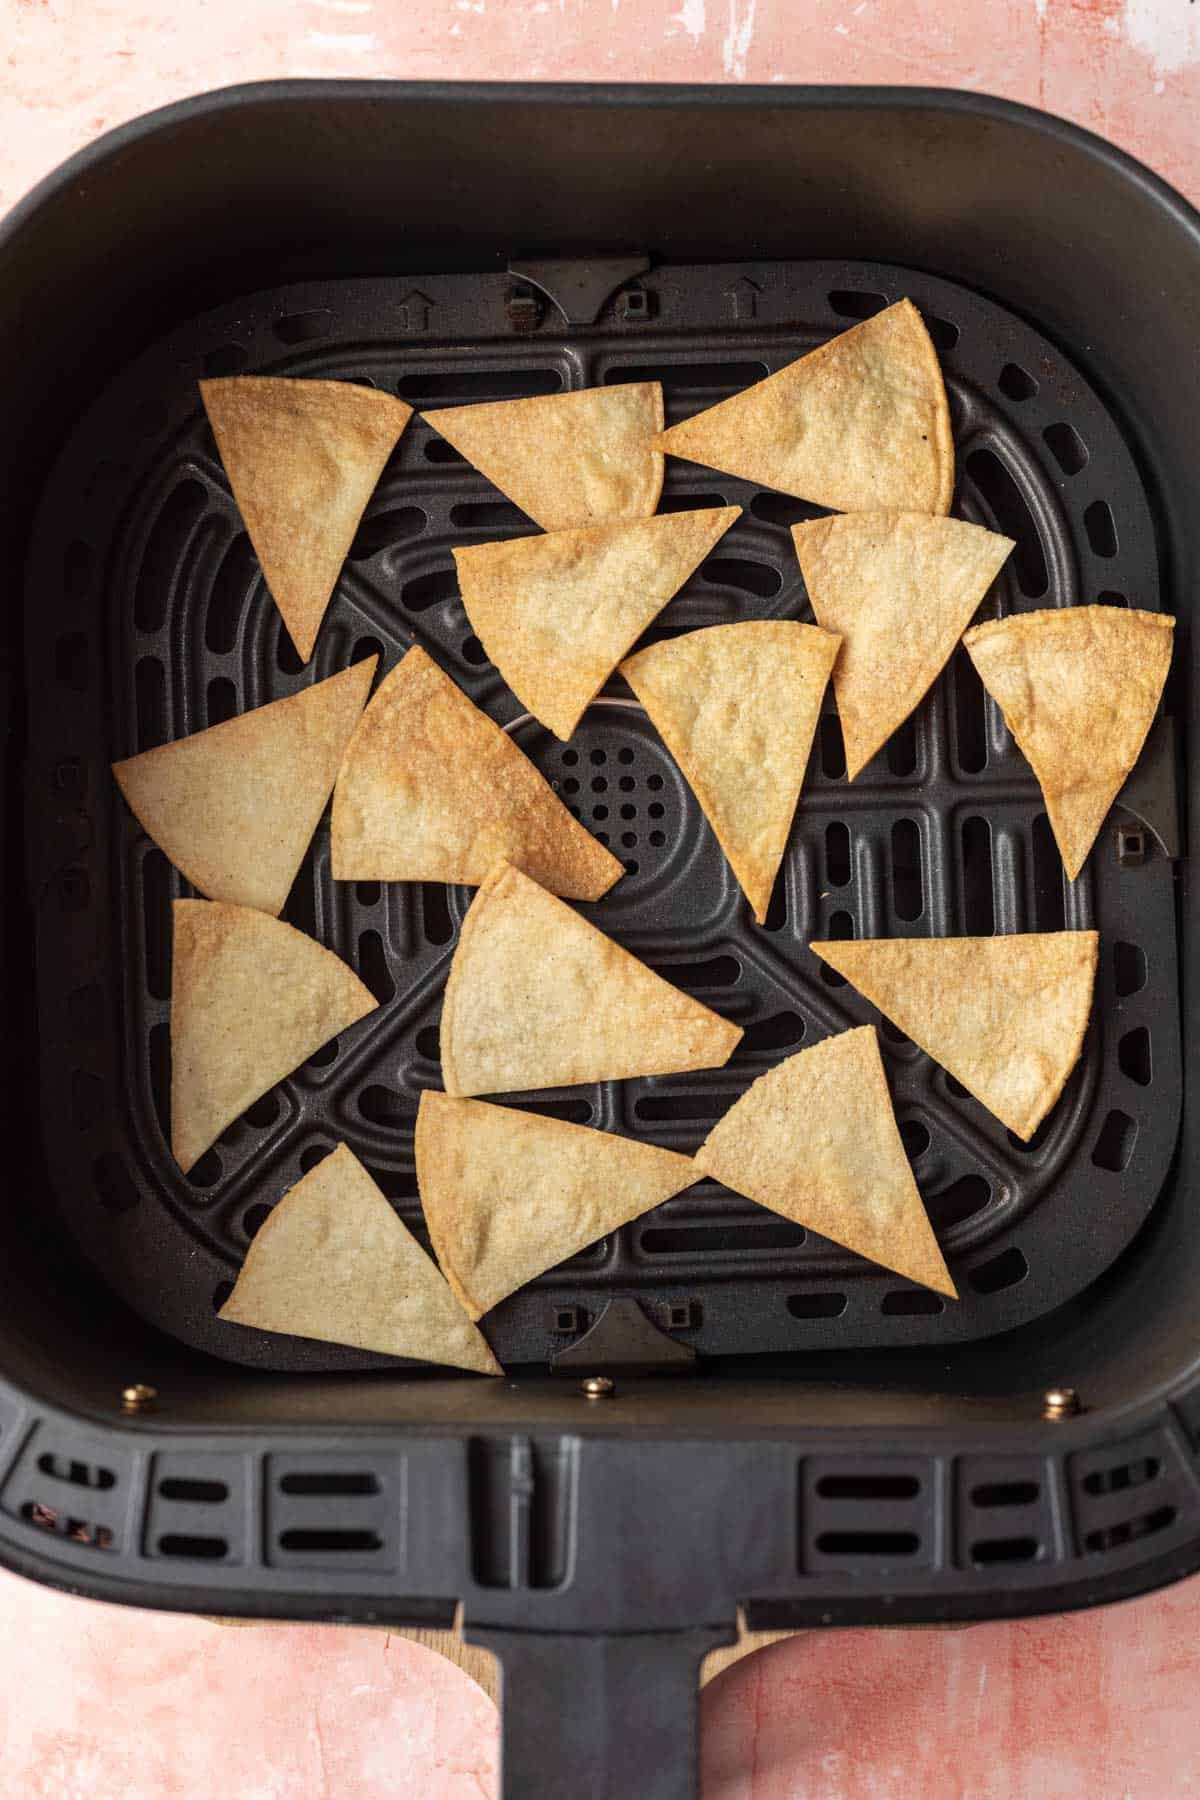 tortilla chips after cooking in the air fryer basket.